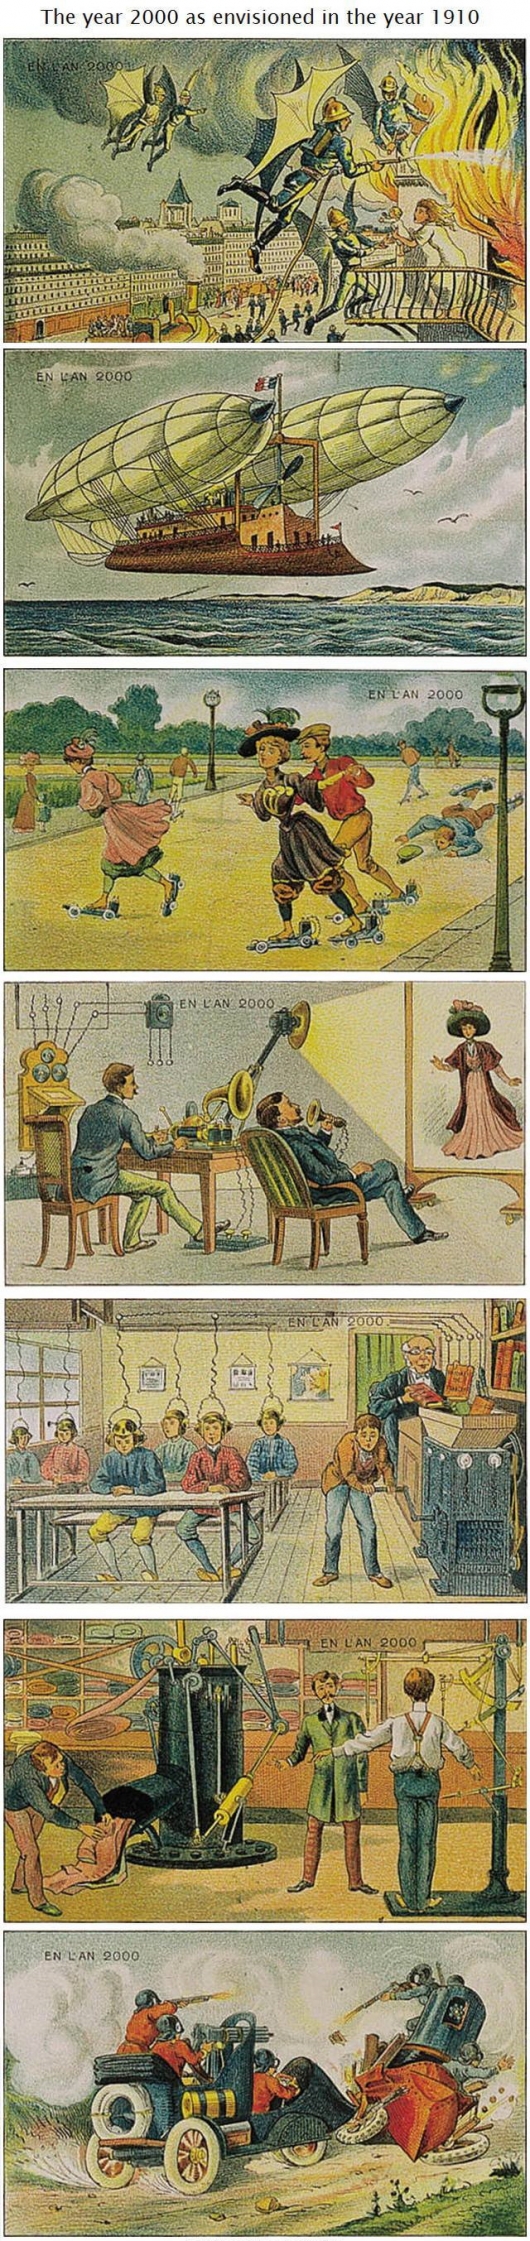 The year 2000 envisioned in the year 1910